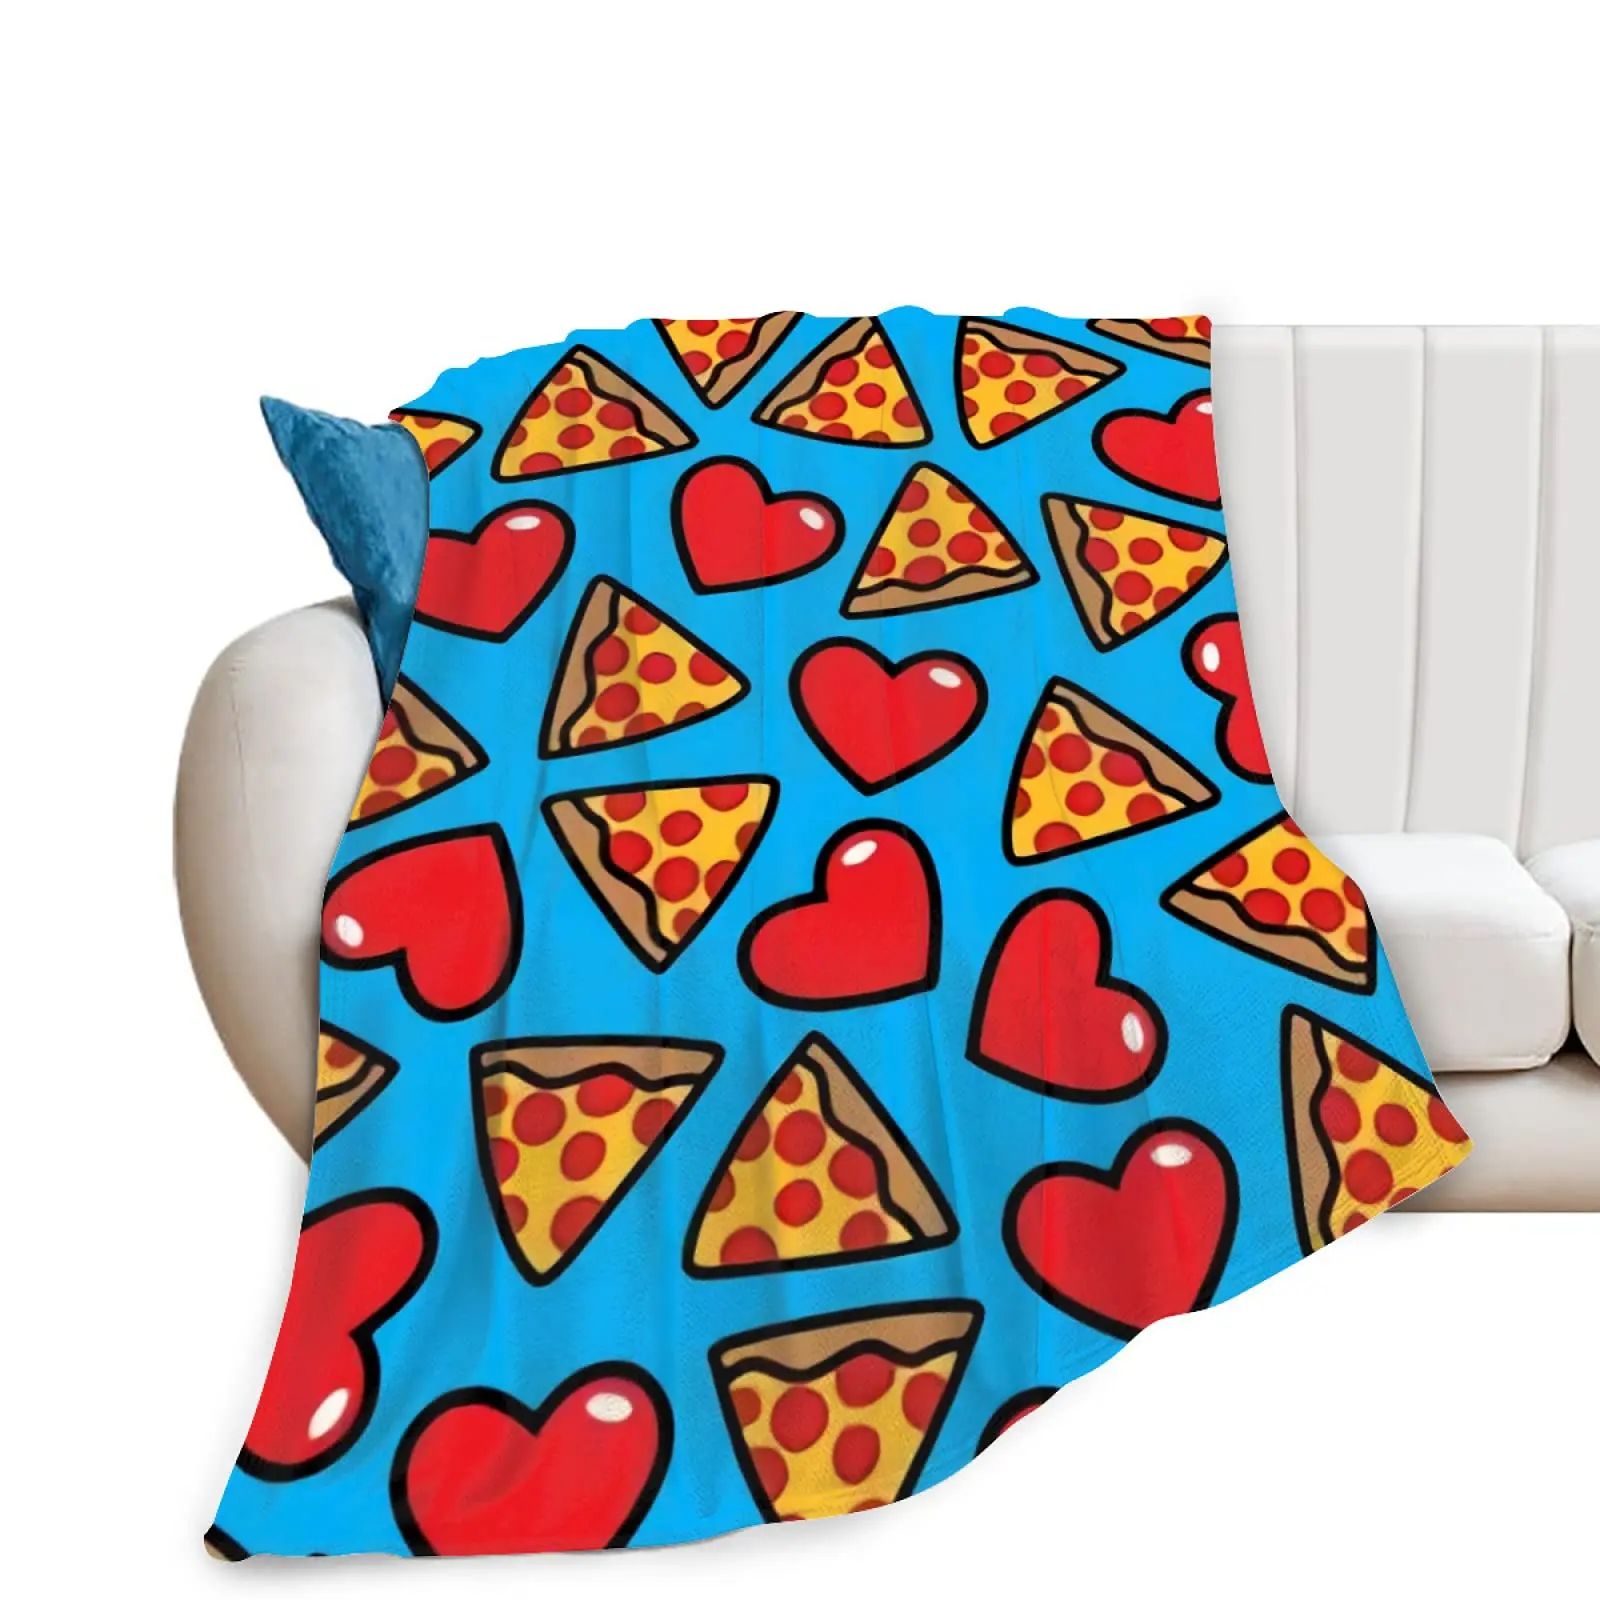 

Pizza Blanket Throw Sausage Blanket for Kids Teen Boys Girls Fast Food Themed King Queen Full Size Super Soft Warm Pizza Flannel